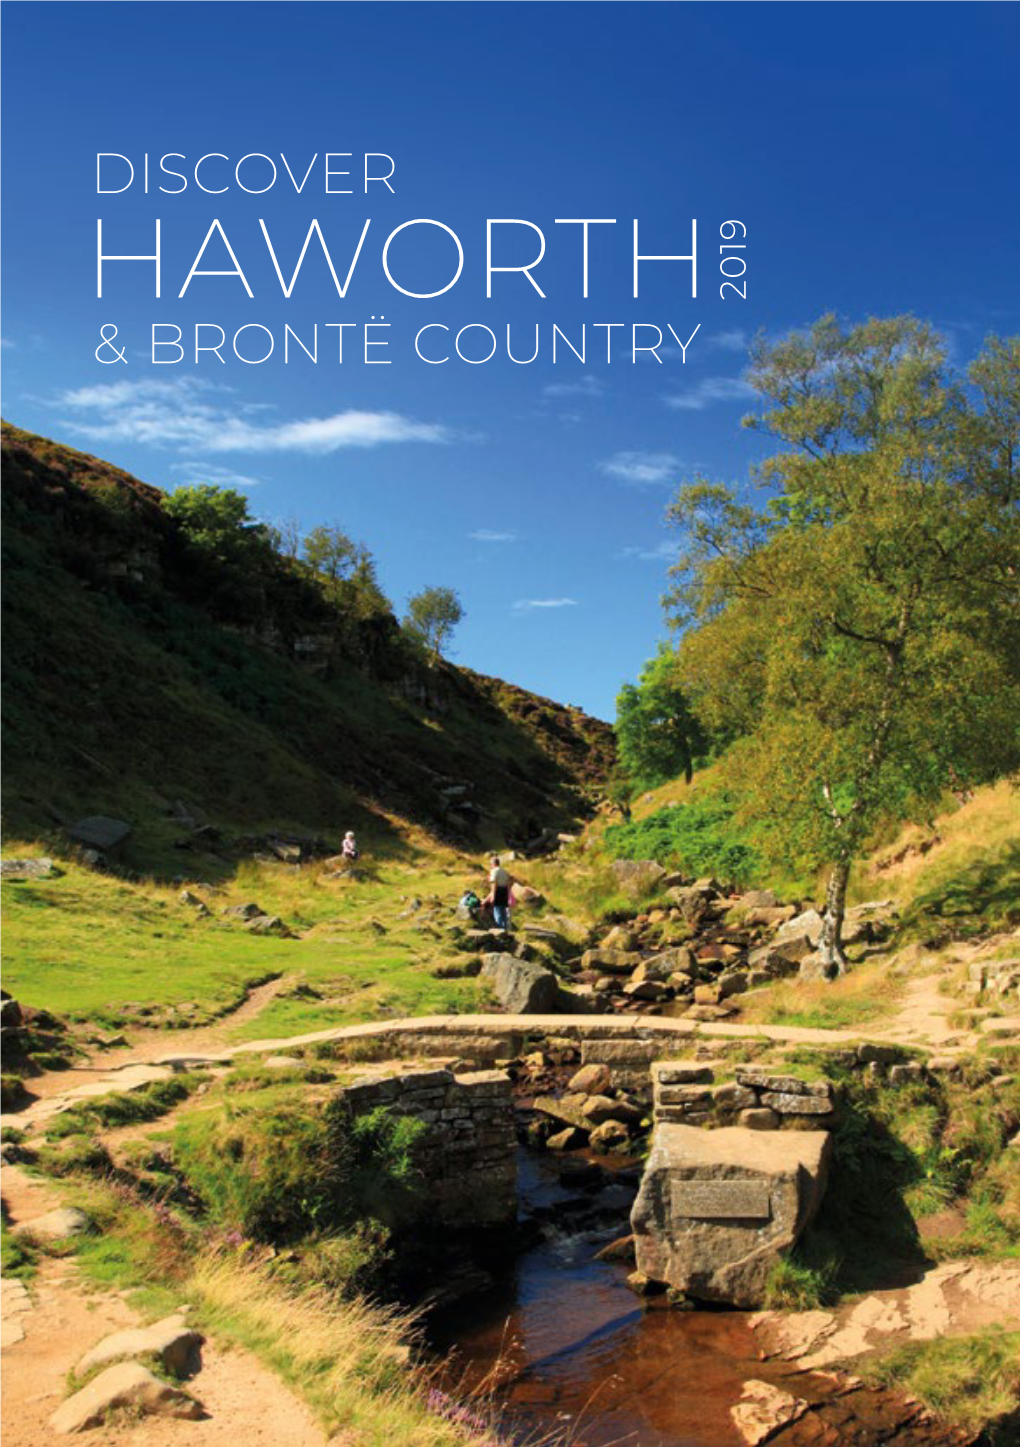 HAWORTH 2019 & BRONTË COUNTRY Discover Haworth & Brontë Country DISCOVER HAWORTH DISCOVER HAWORTH Haworth Sits in the Worth Valley Surrounded by Dramatic Moorlands